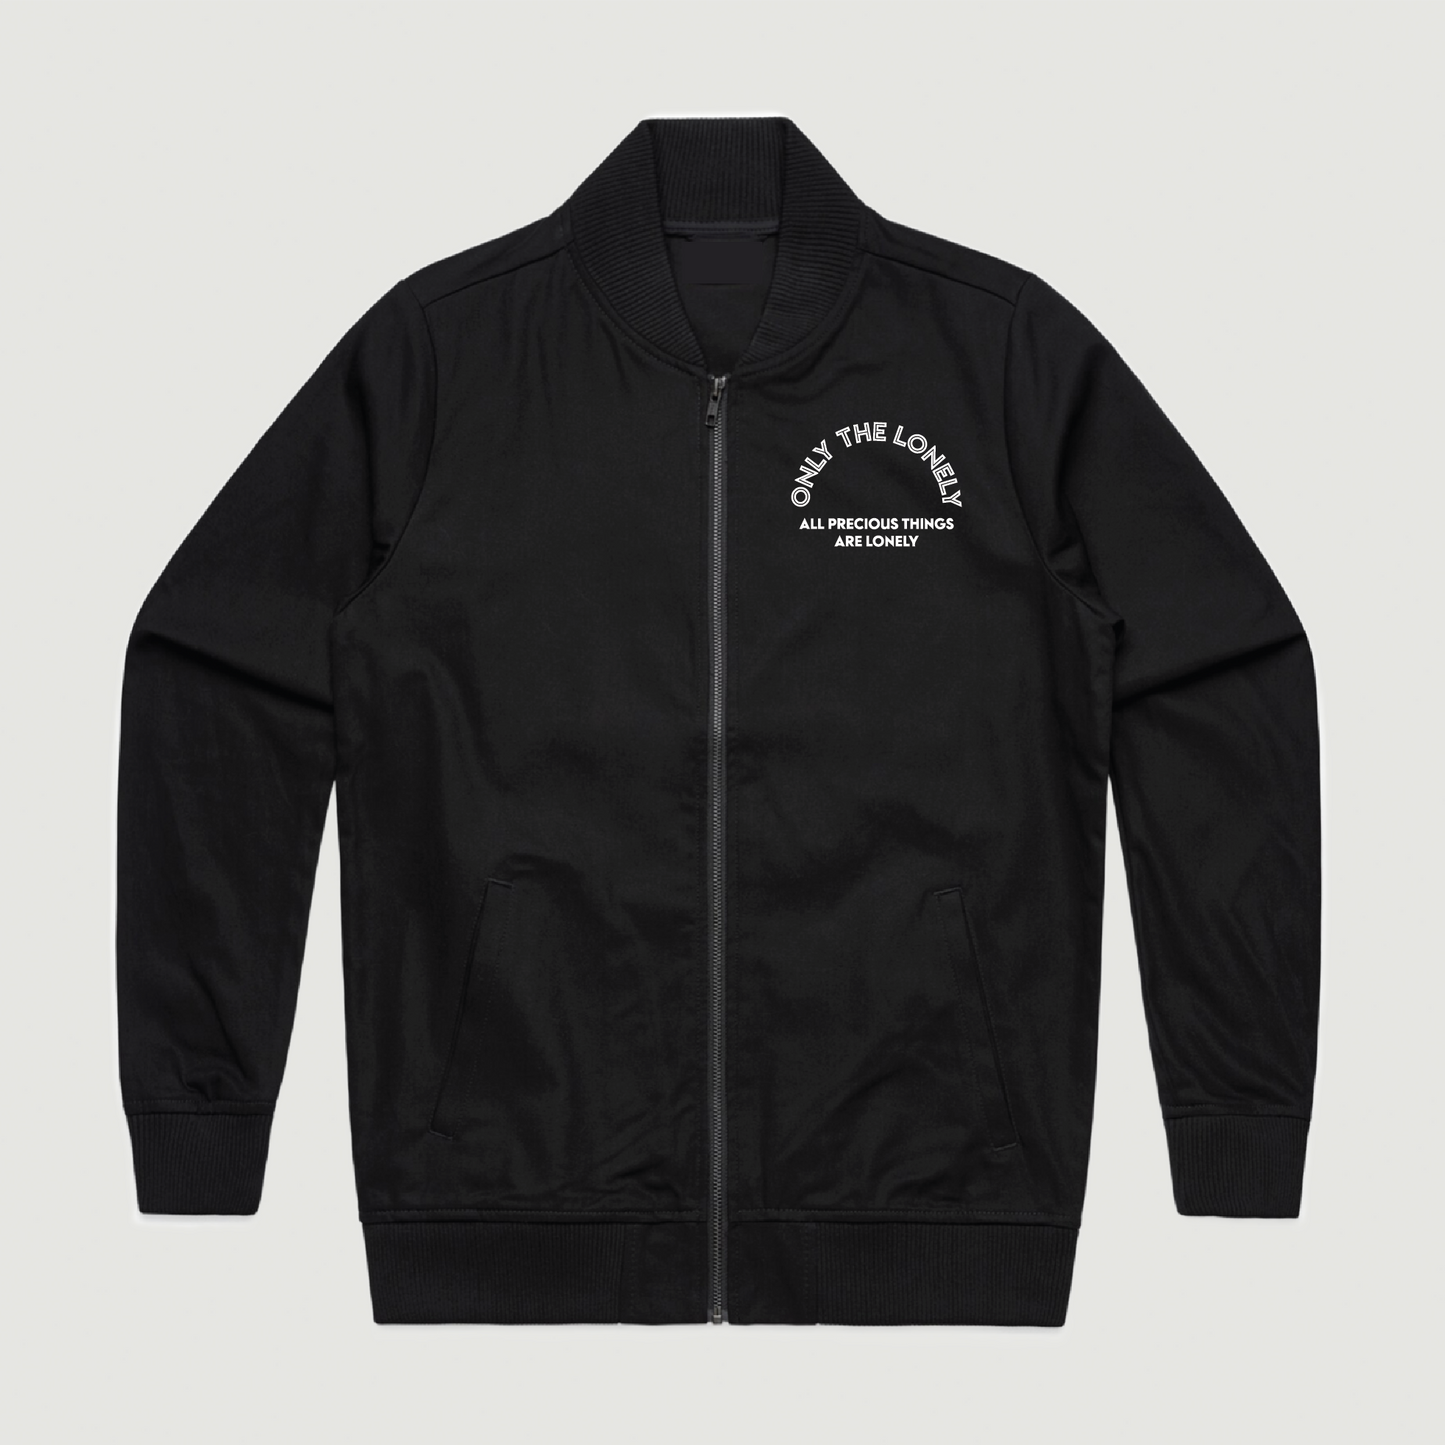 ONLY THE LONELY BOMBER JACKET (BLACK)